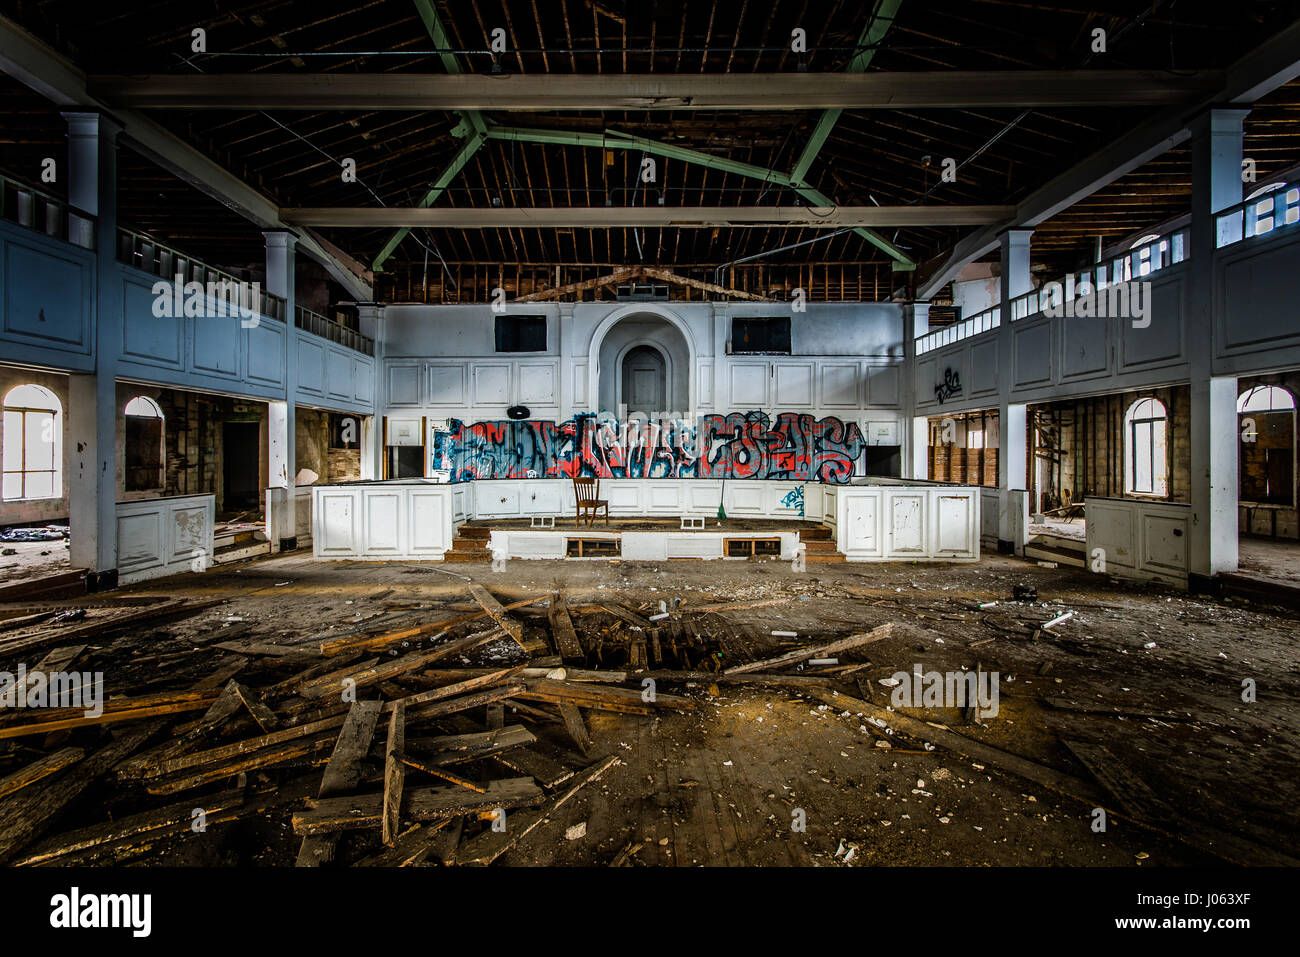 MIAMI, FLORIDA, USA: EERIE photographs have revealed the decaying remains of the Miami church that was bought by the founder of the black supremacist Nation of Yahweh movement who declared himself the Son of God and plotted to kill white Americans. From collapsing wooden floorboards to rubbish tipped stairs and graffiti clad walls the church is a far cry from its heyday.  Other shots show furniture dumped in rooms and a lone chair left in what looks like a main hall. The stunning shots were taken in the Little Haiti neighbourhood by an American photographer known only as Bullet. To take the st Stock Photo